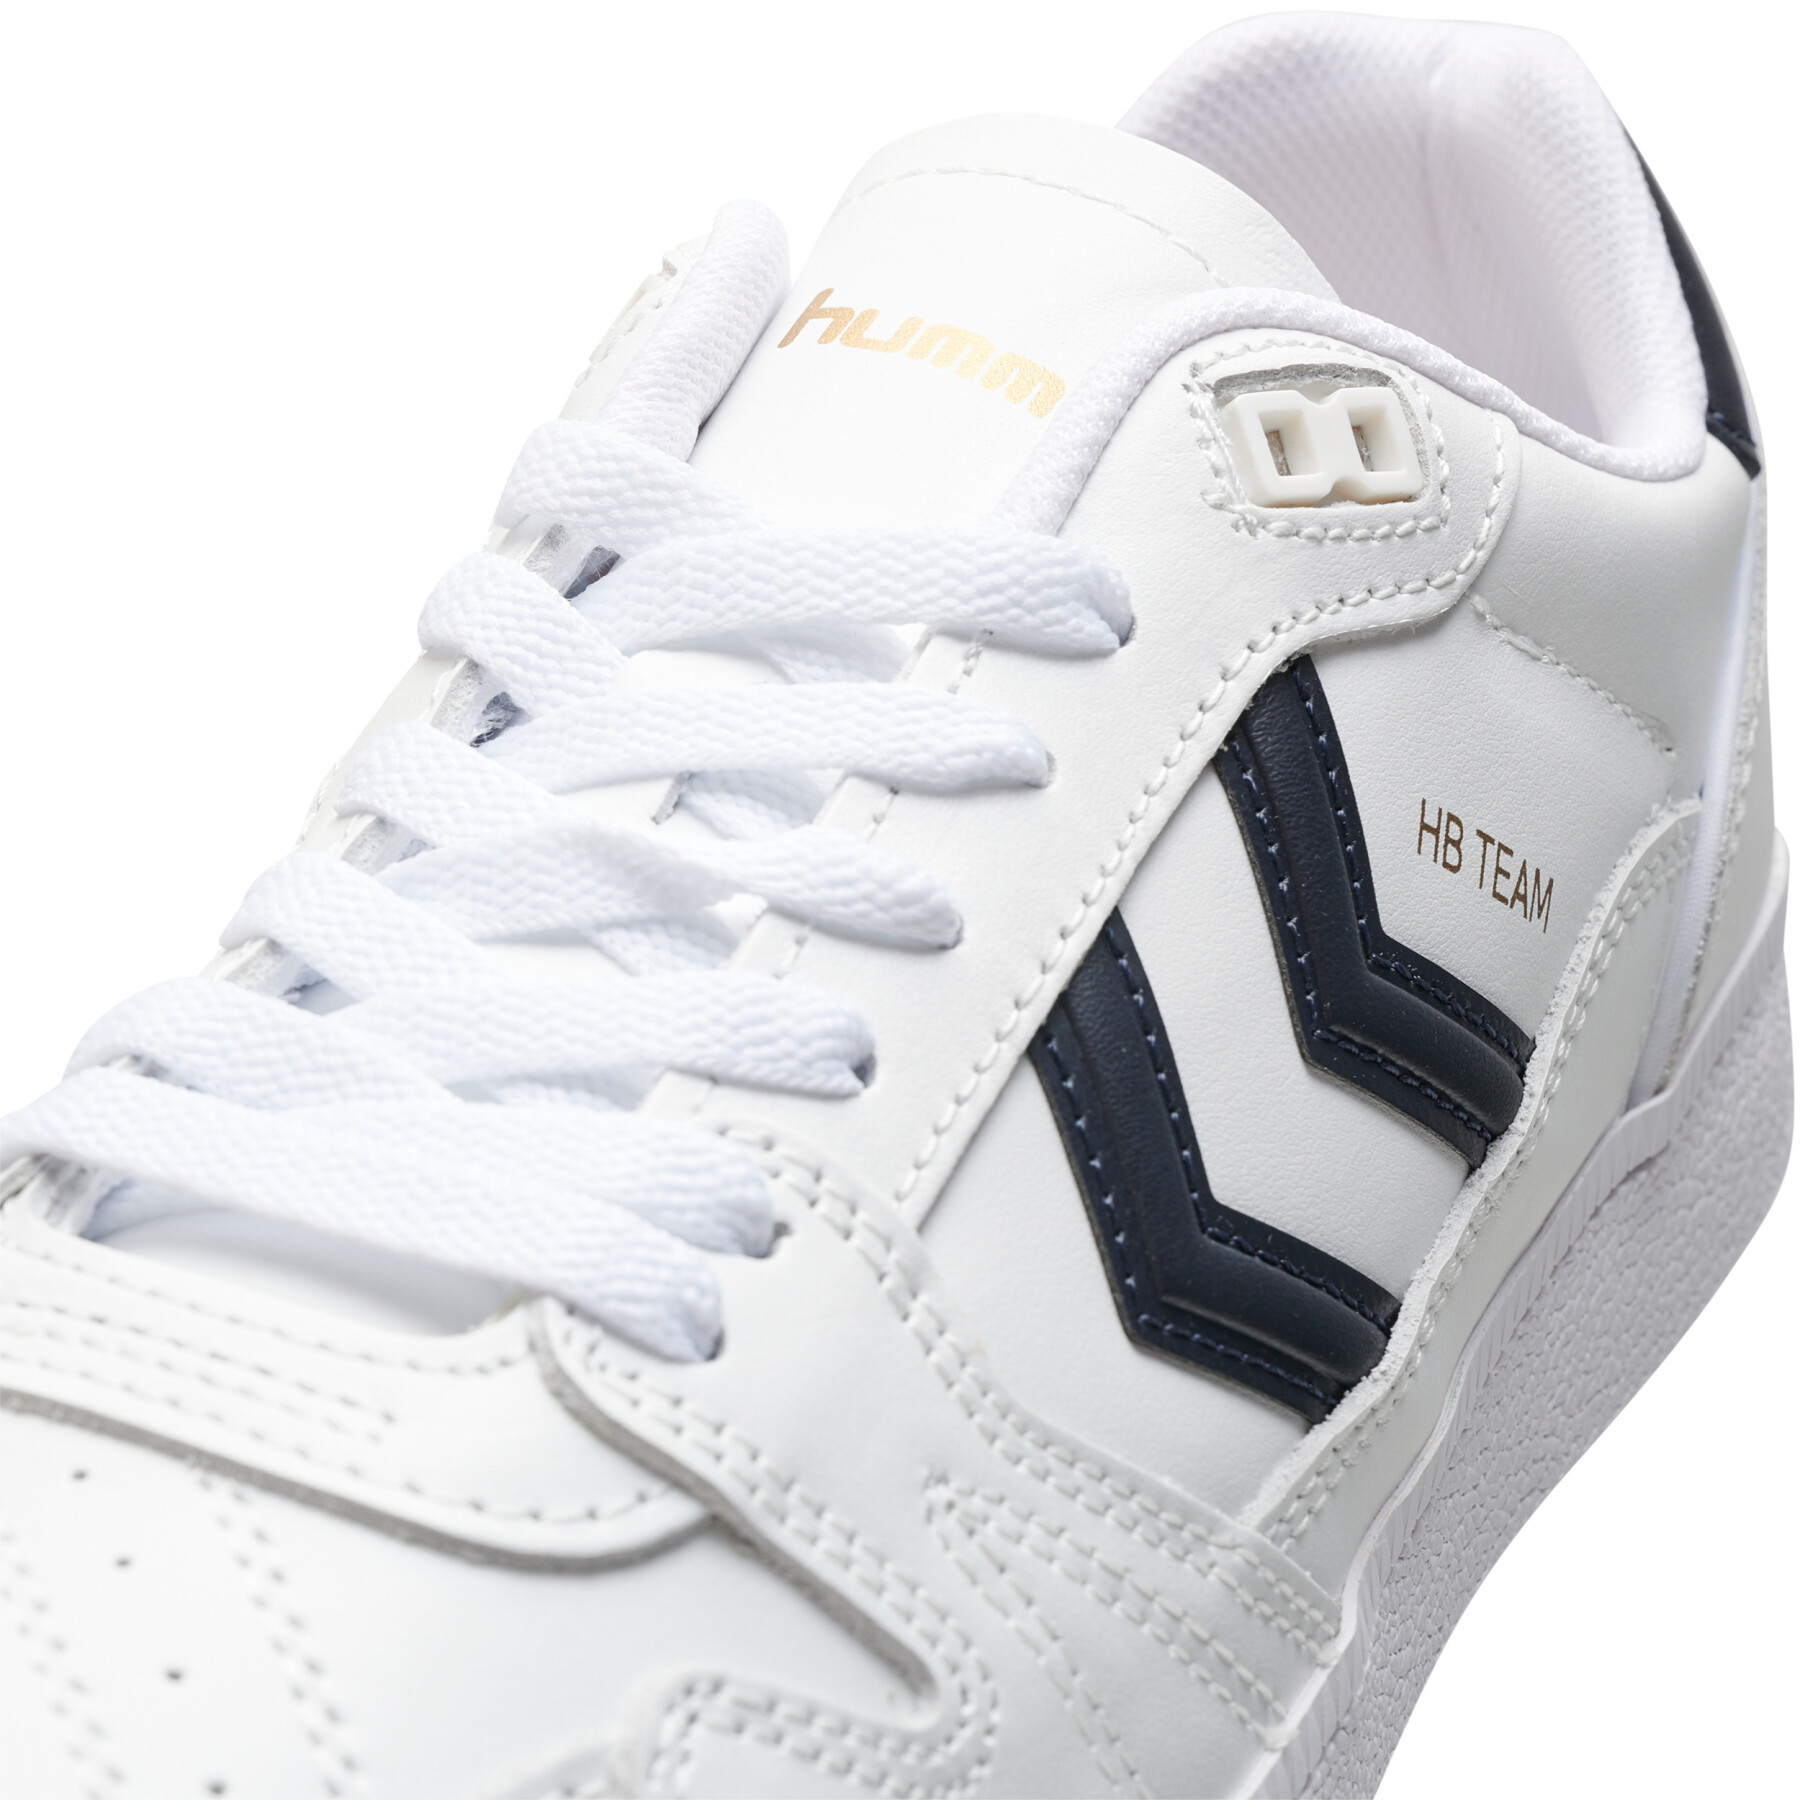 Sneakers Hummel Hb Team Leather